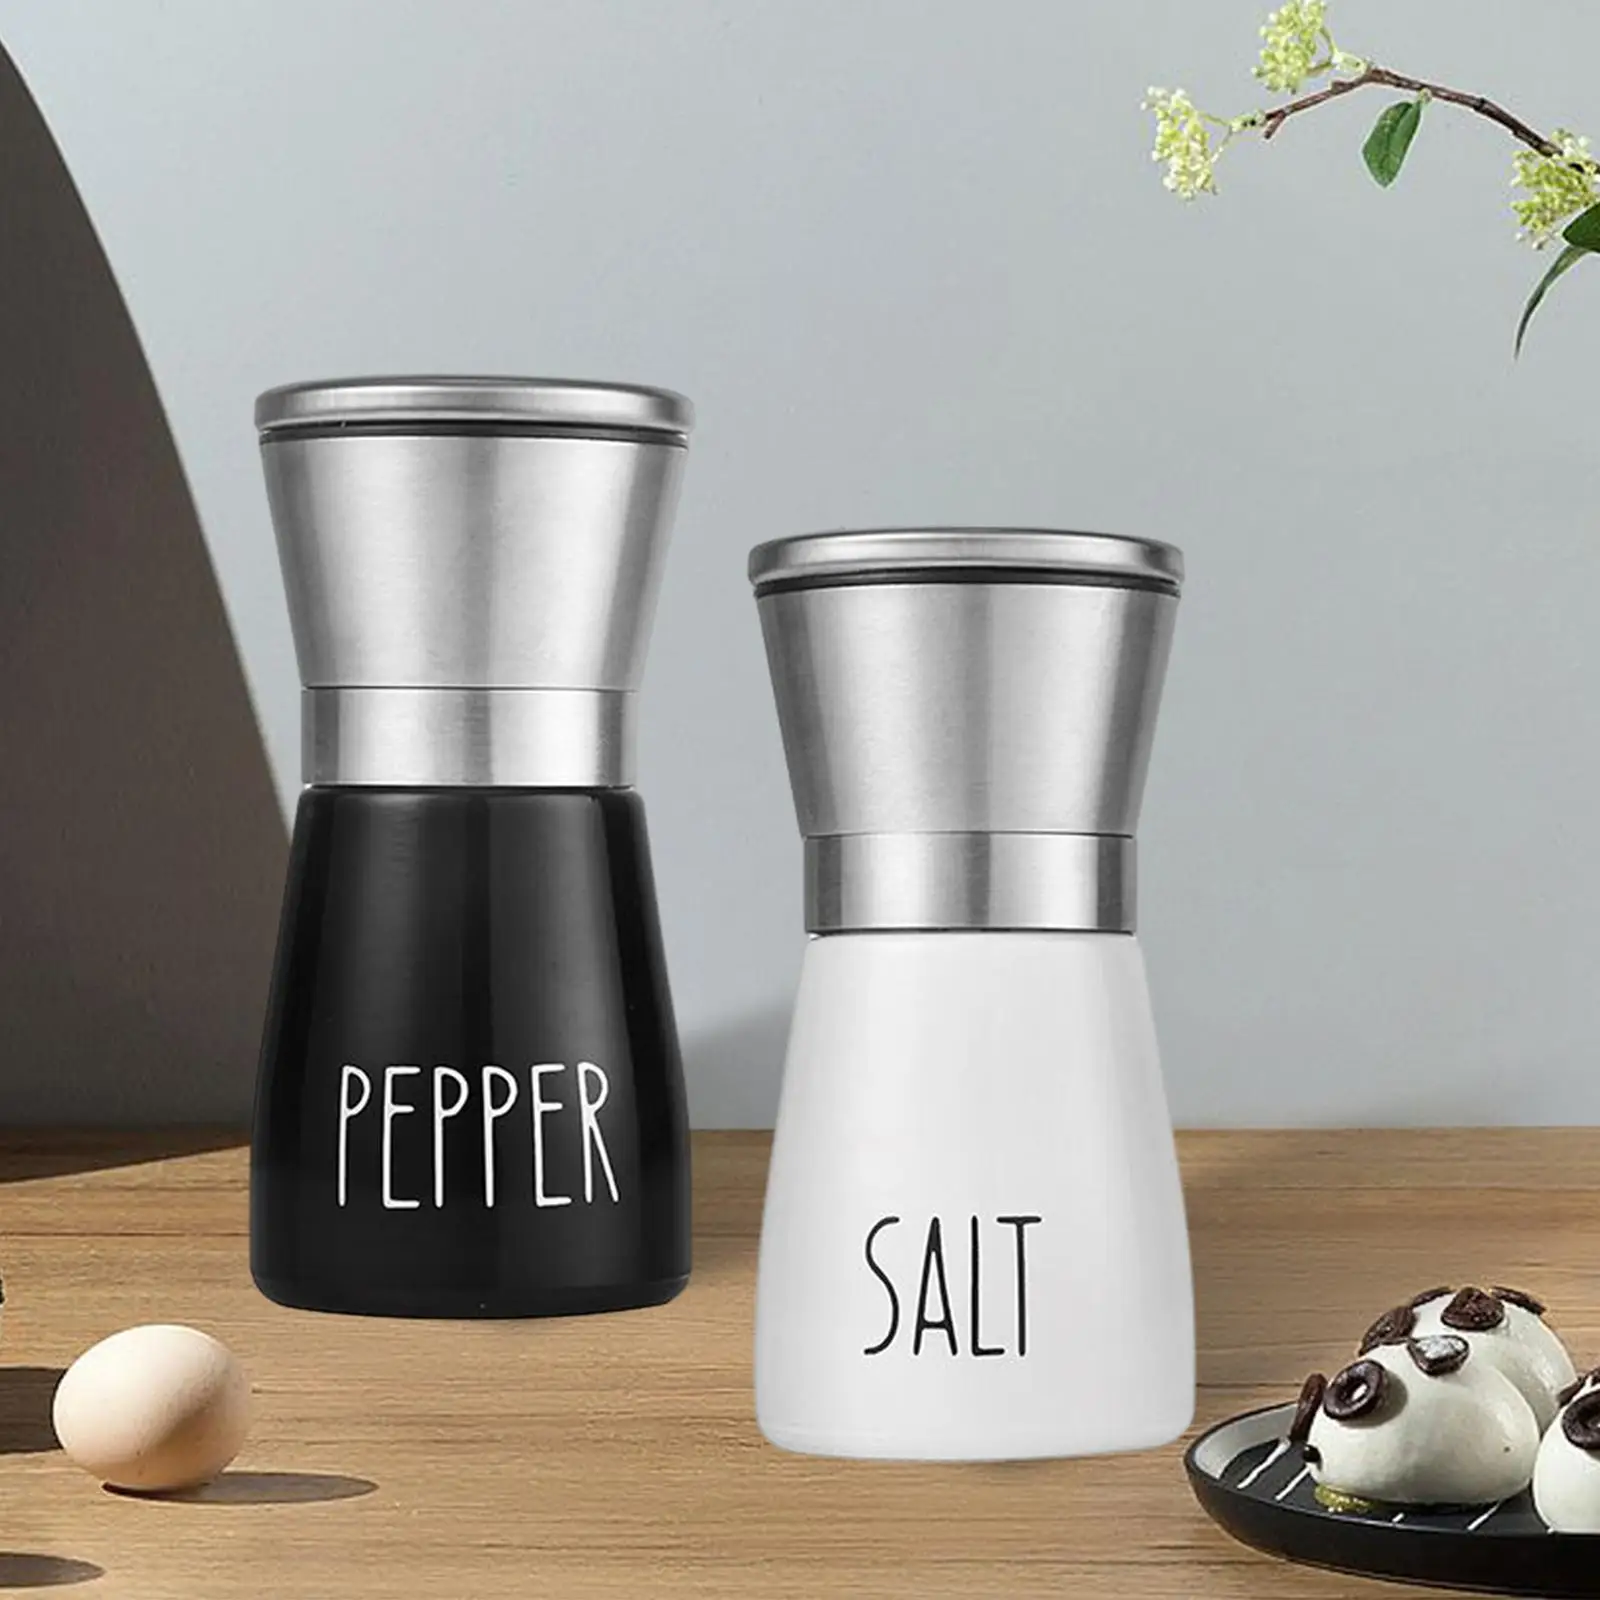 https://ae01.alicdn.com/kf/S3811c82ffe8c4069b9f1c0ba6f2c7a05E/Set-of-2-Refillable-Salt-Pepper-Grinder-Set-Stainless-Steel-for-Home-Barbecue-Party-and-Every.jpg